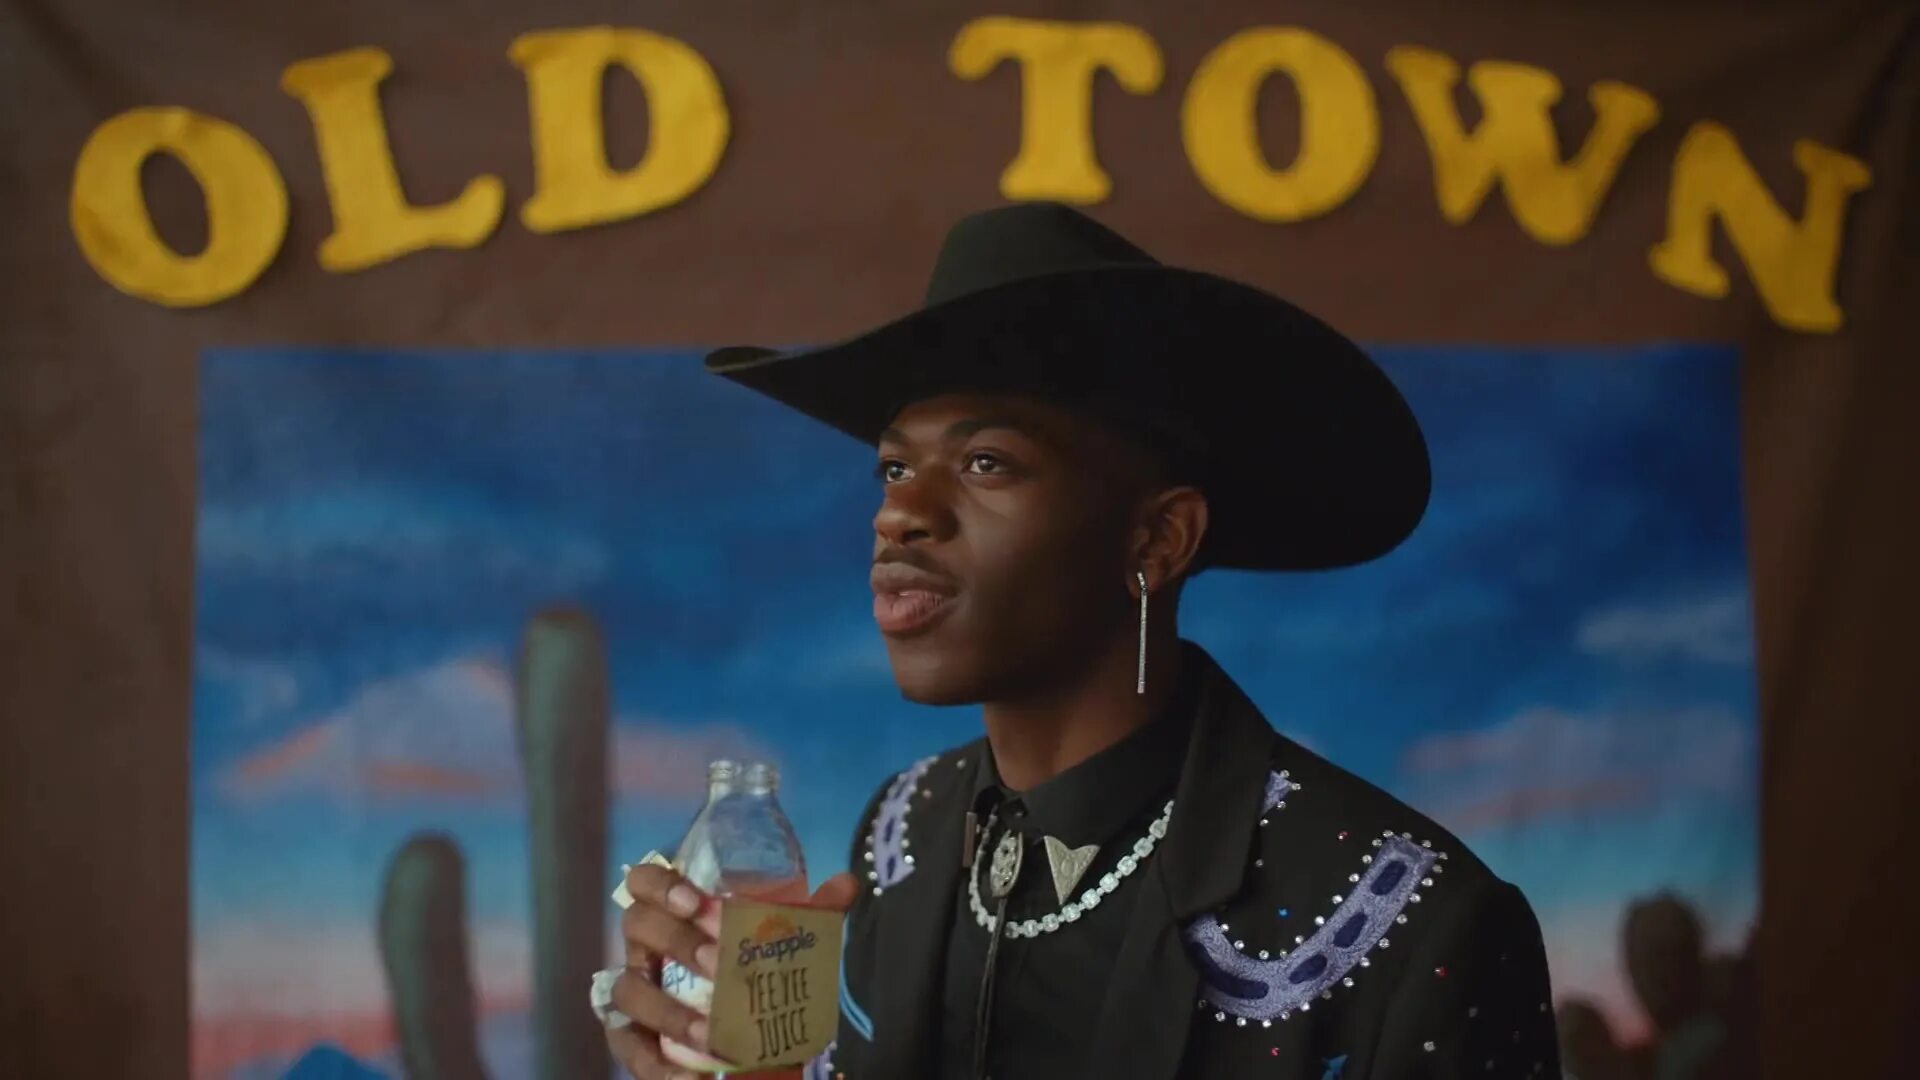 Lil nas x old Town Road. Lil nas x ковбой. Lil nas x’s old Town Road.